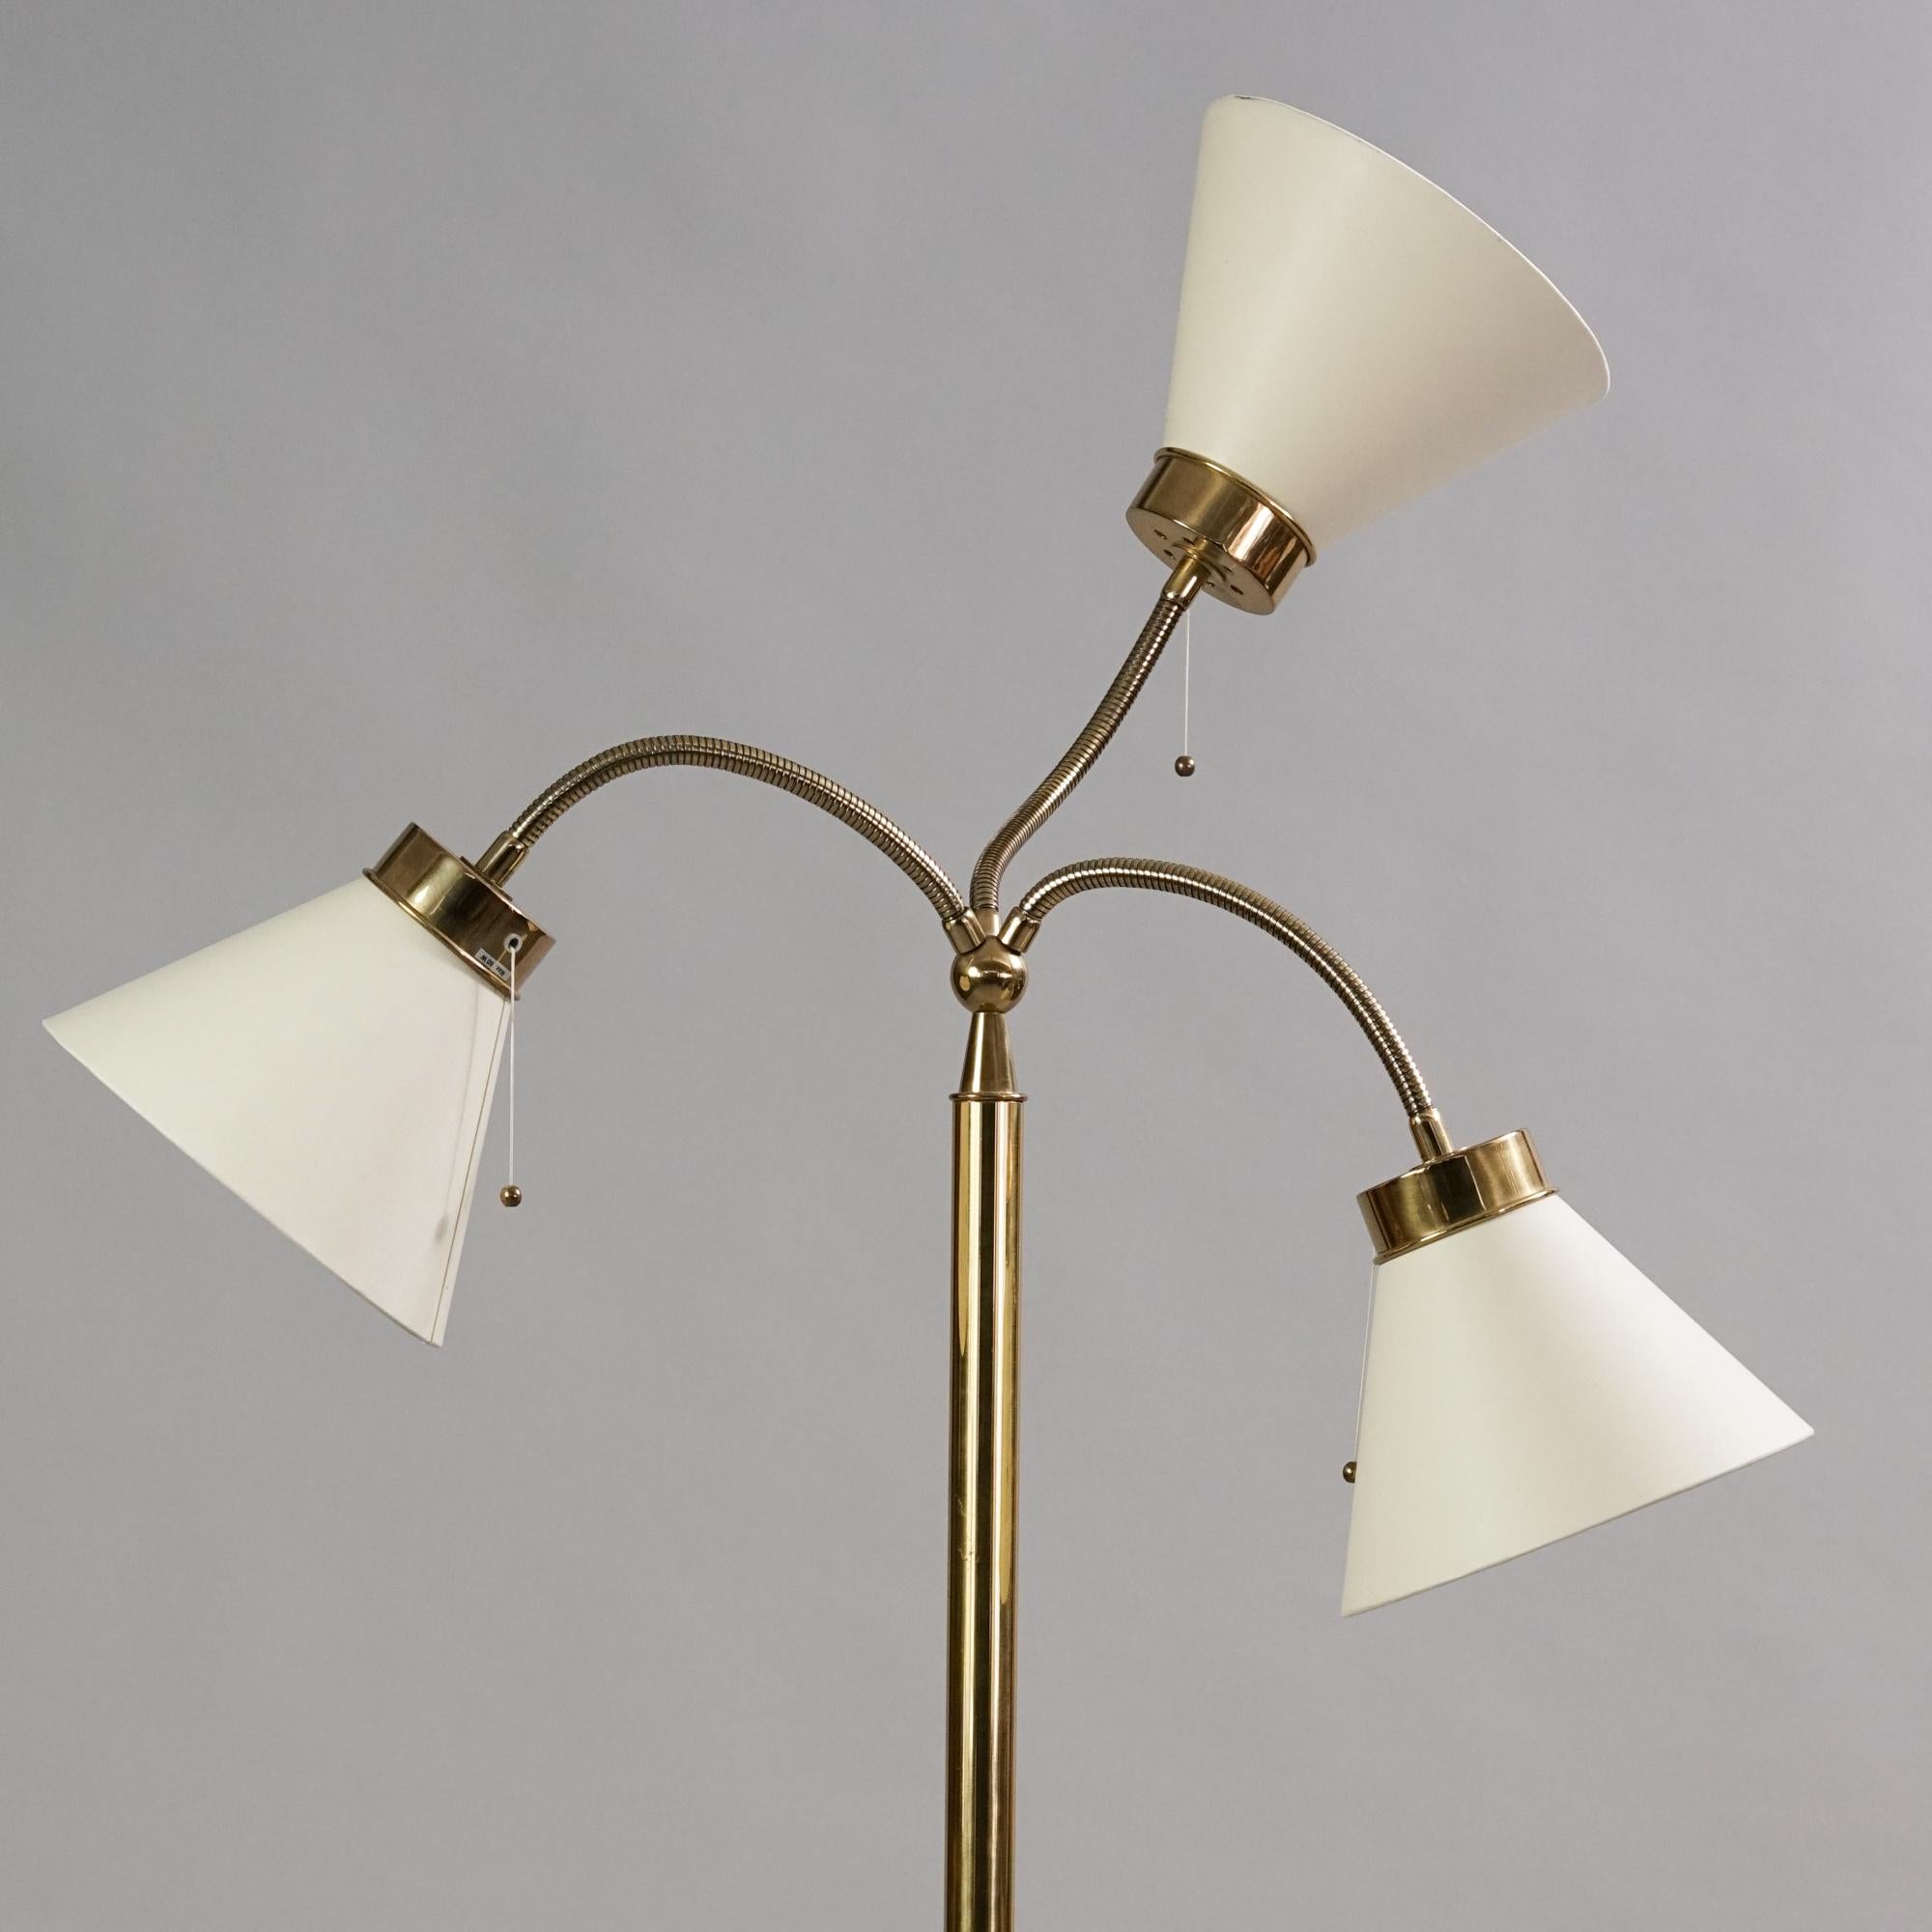 Mid-Century Modern floor lamp model 2431 designed by Josef Frank for Svenskt Tenn. This lamp is from the 1950s. Brass and linen. Good original condition, minor wear consistent with age and use. Manufactures stamp on the bottom. 

Measurements :